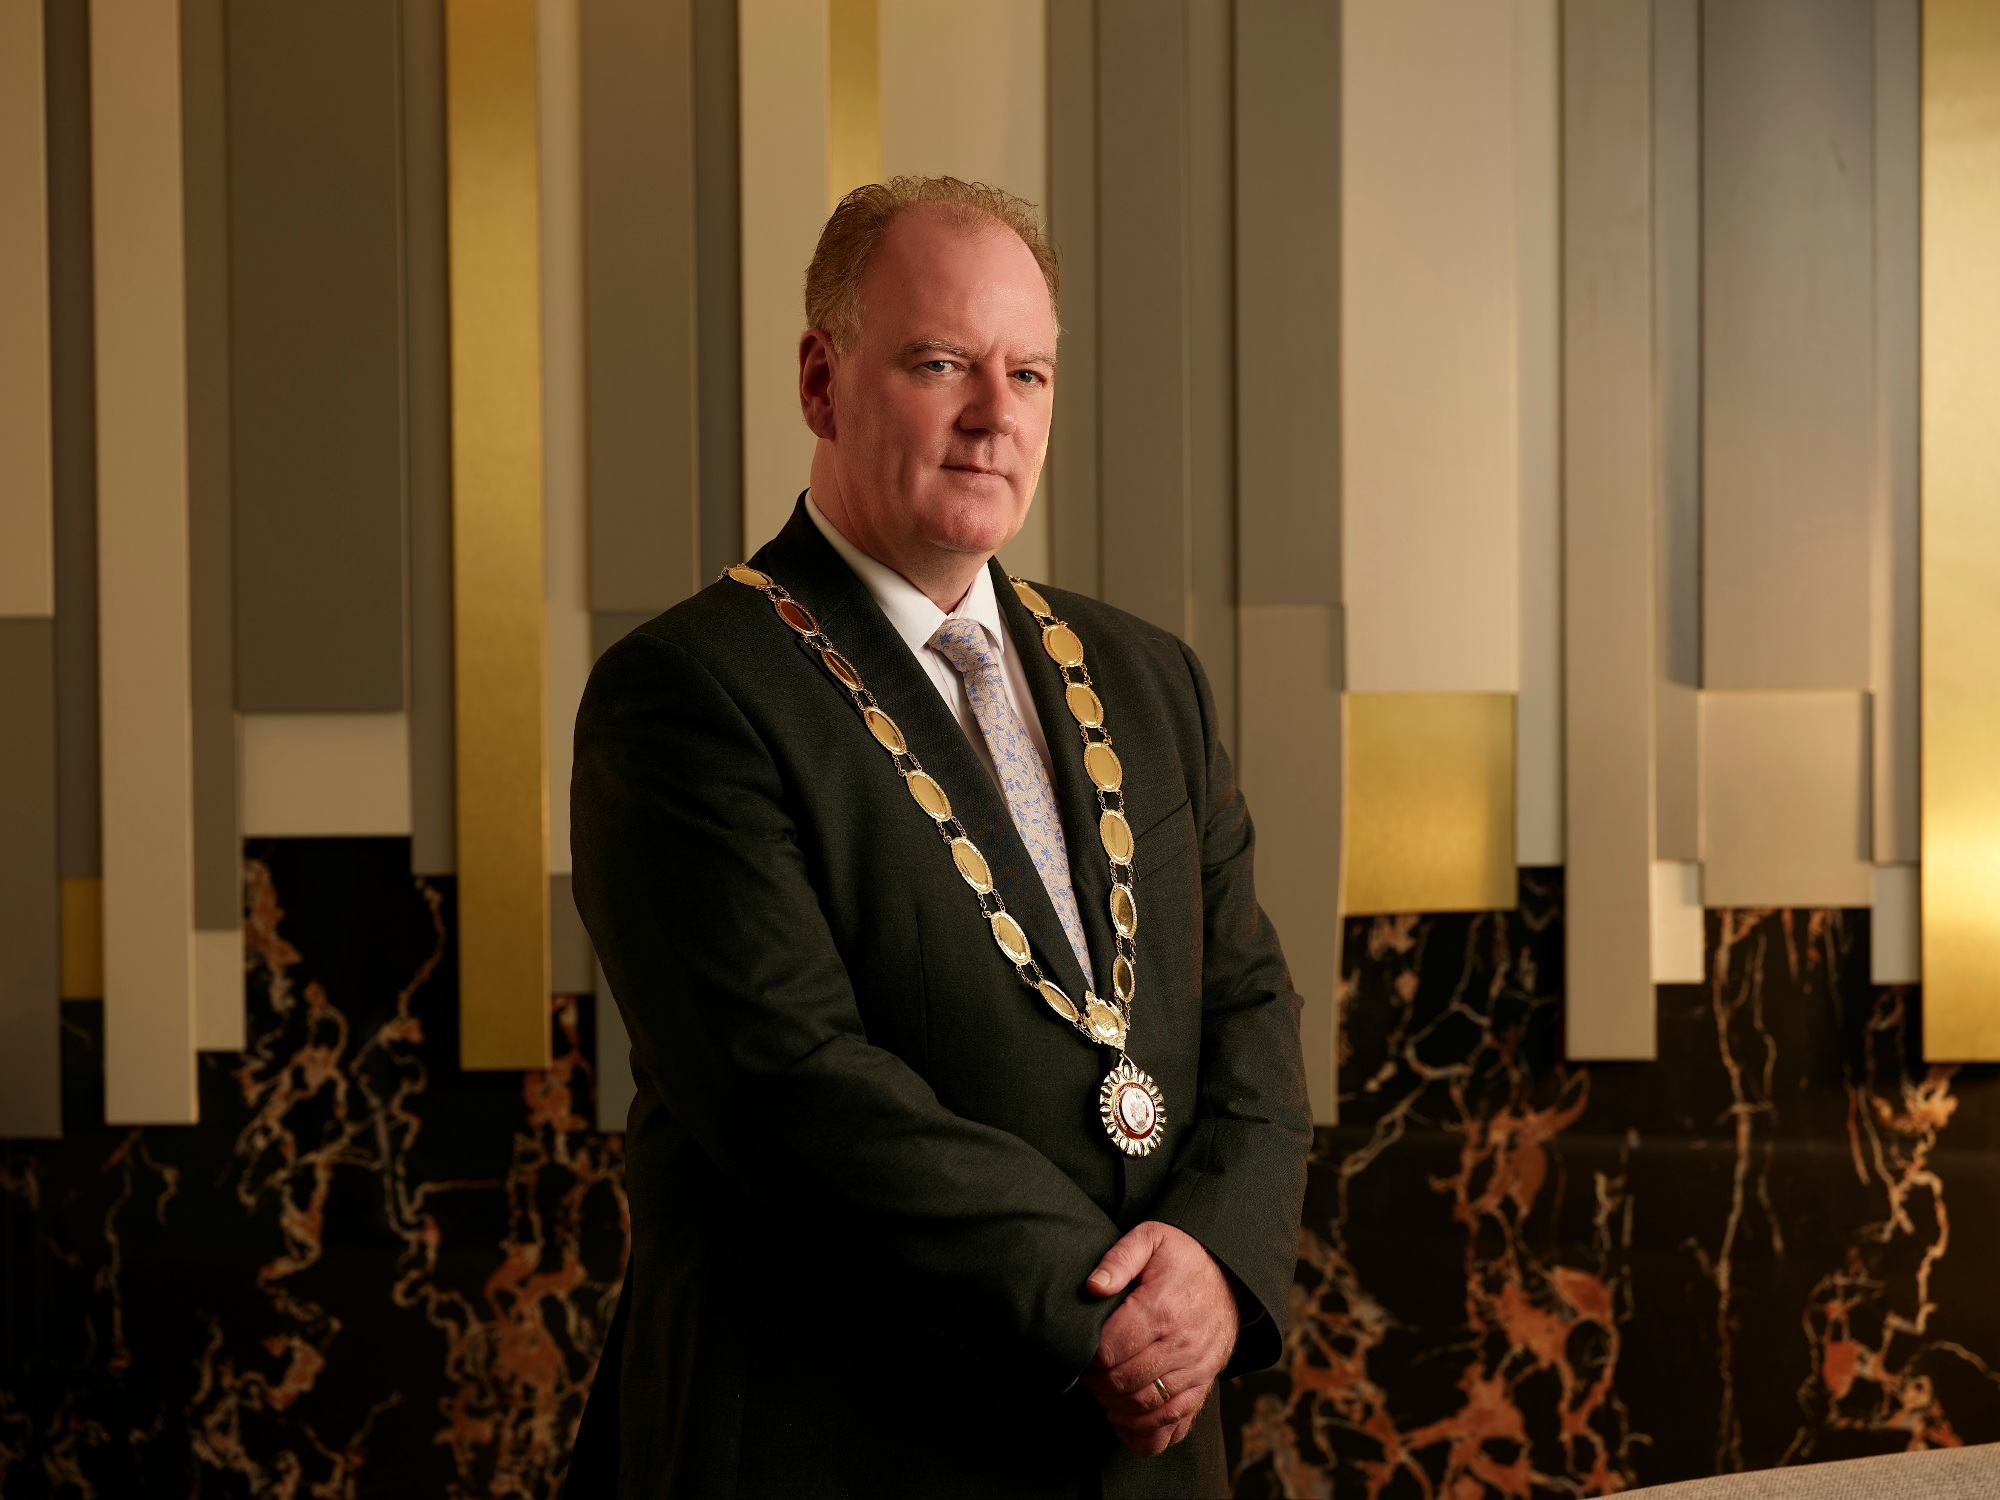 Brian Archer takes up presidency of Law Society of Northern Ireland